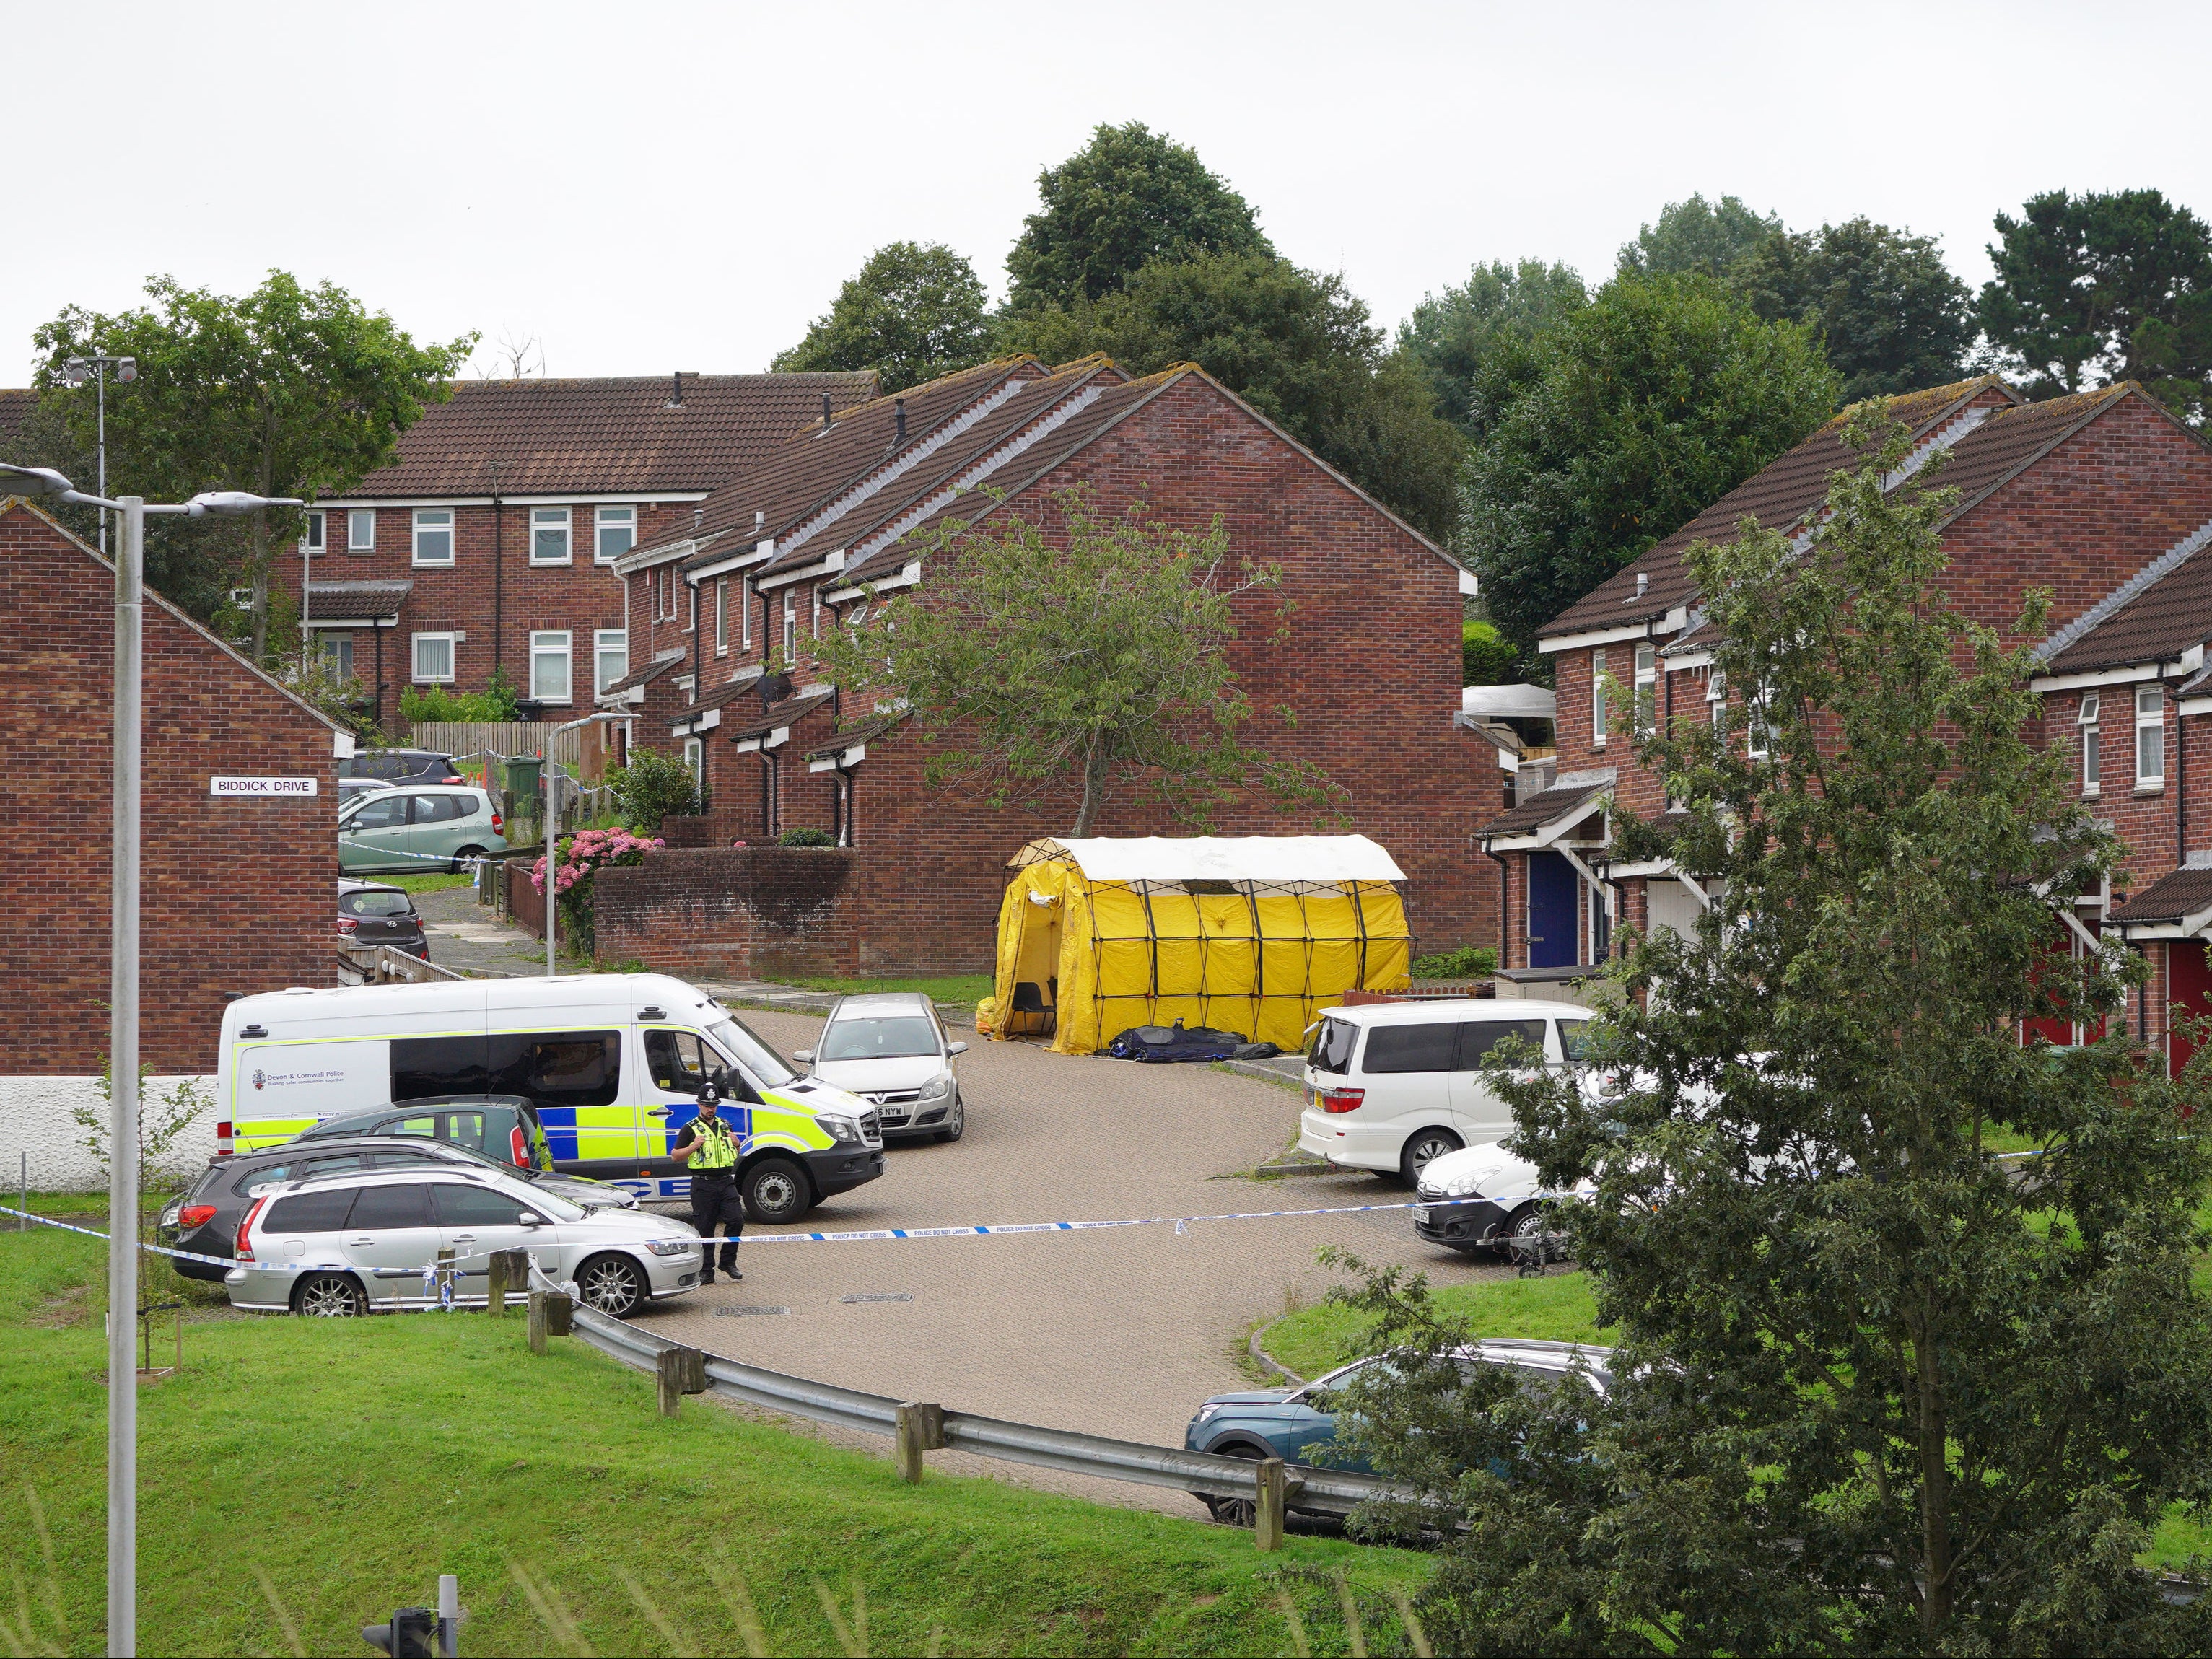 Police activity in Biddick Drive in the Keyham area of Plymouth, where the shooting spree started